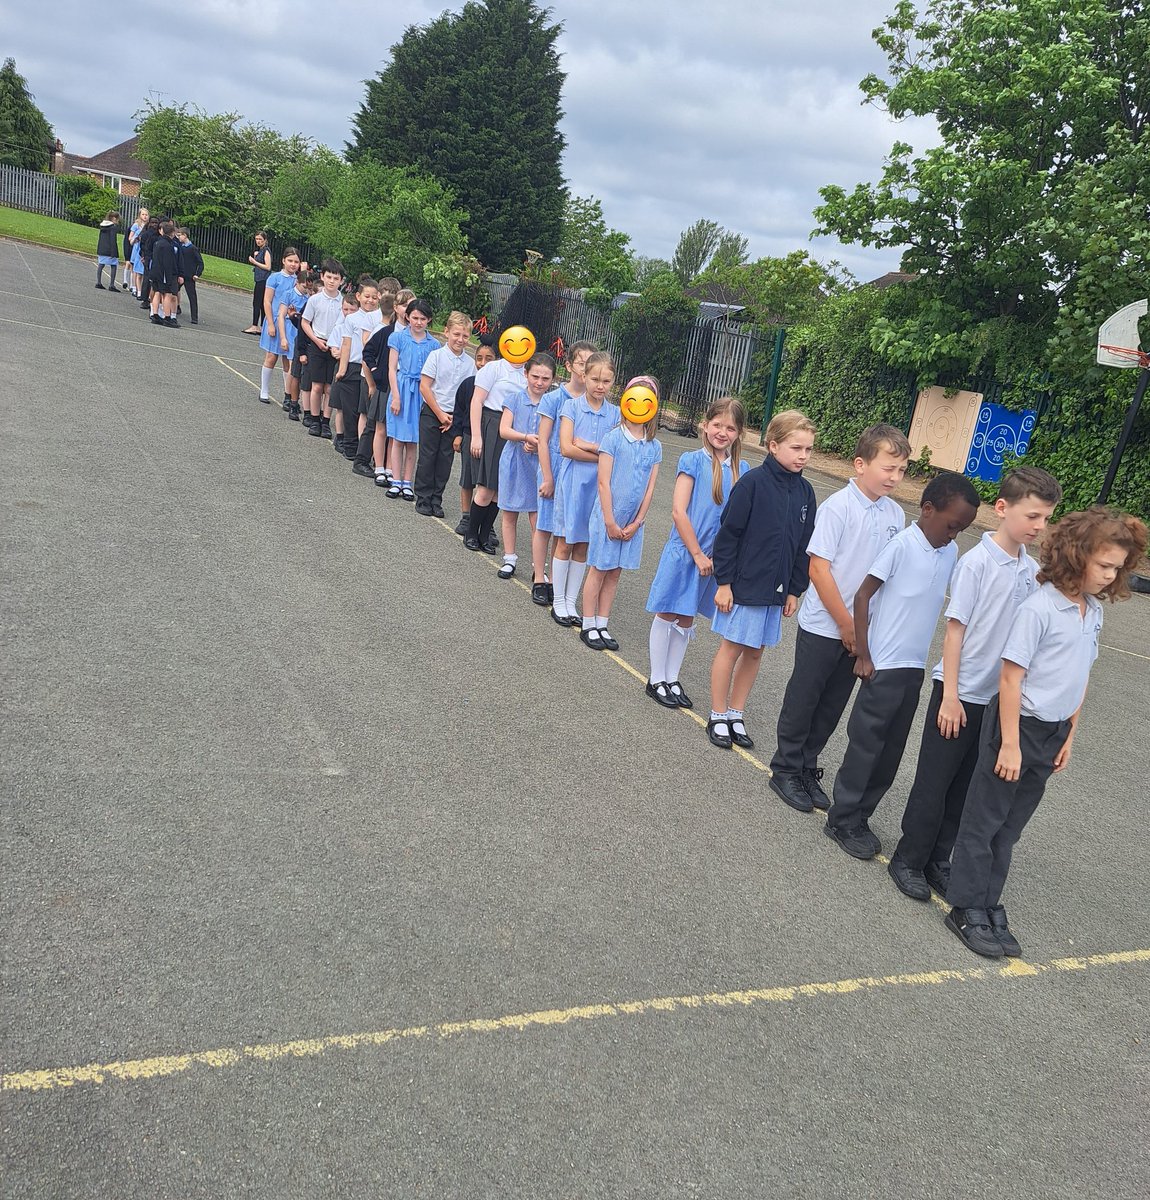 Year 4 being fabulous role models after playtime today, setting the standard for lining up 👌⭐️👏
#leadingbyexample #highstandards #superstars